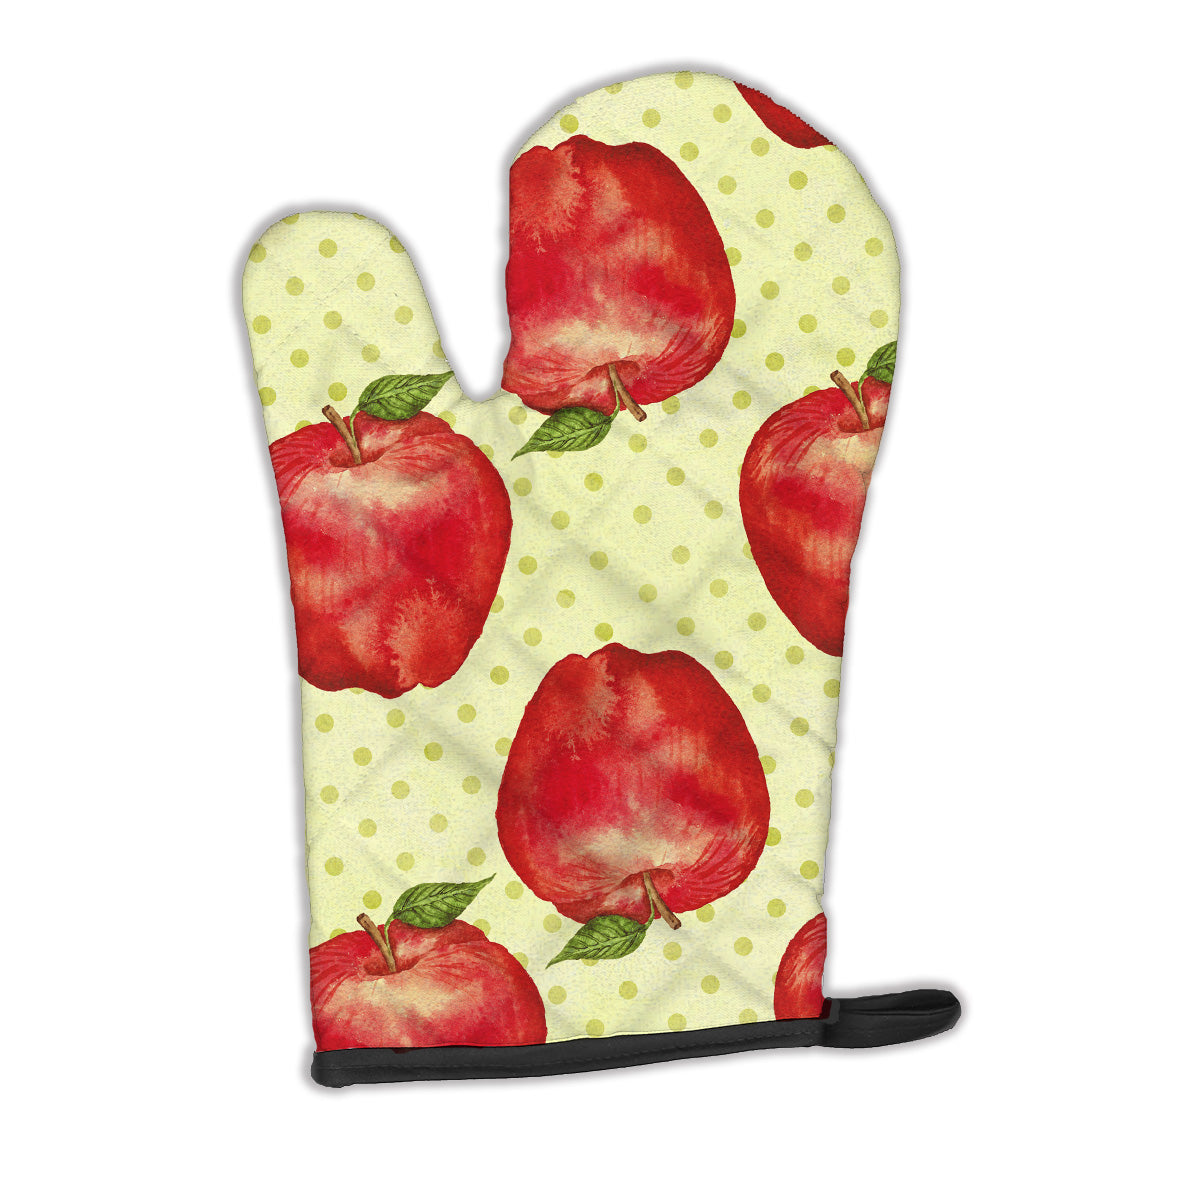 Watercolor Apples and Polkadots Oven Mitt BB7516OVMT